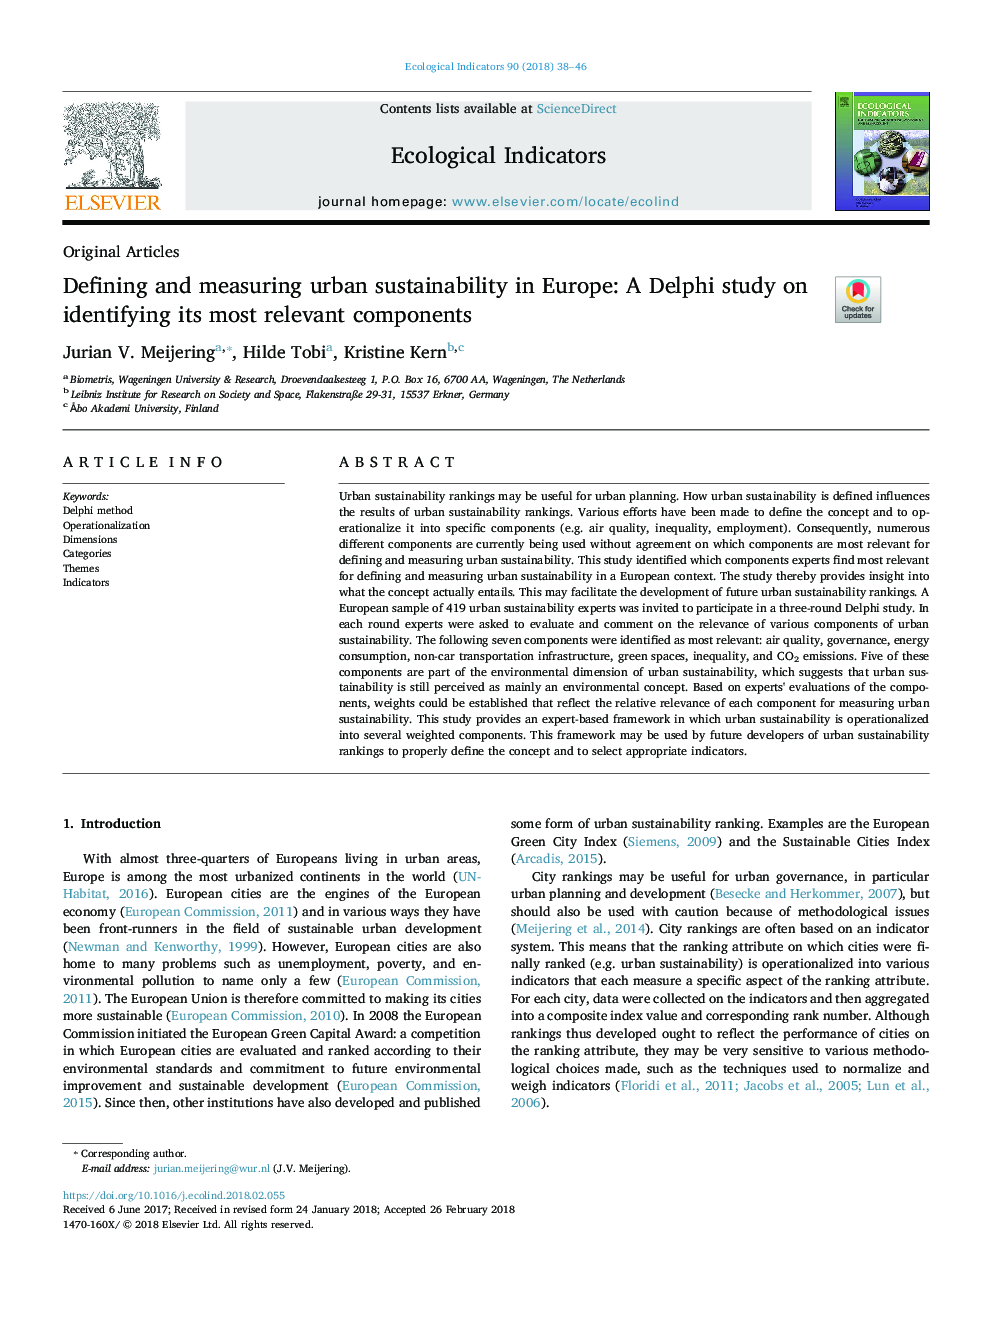 Defining and measuring urban sustainability in Europe: A Delphi study on identifying its most relevant components